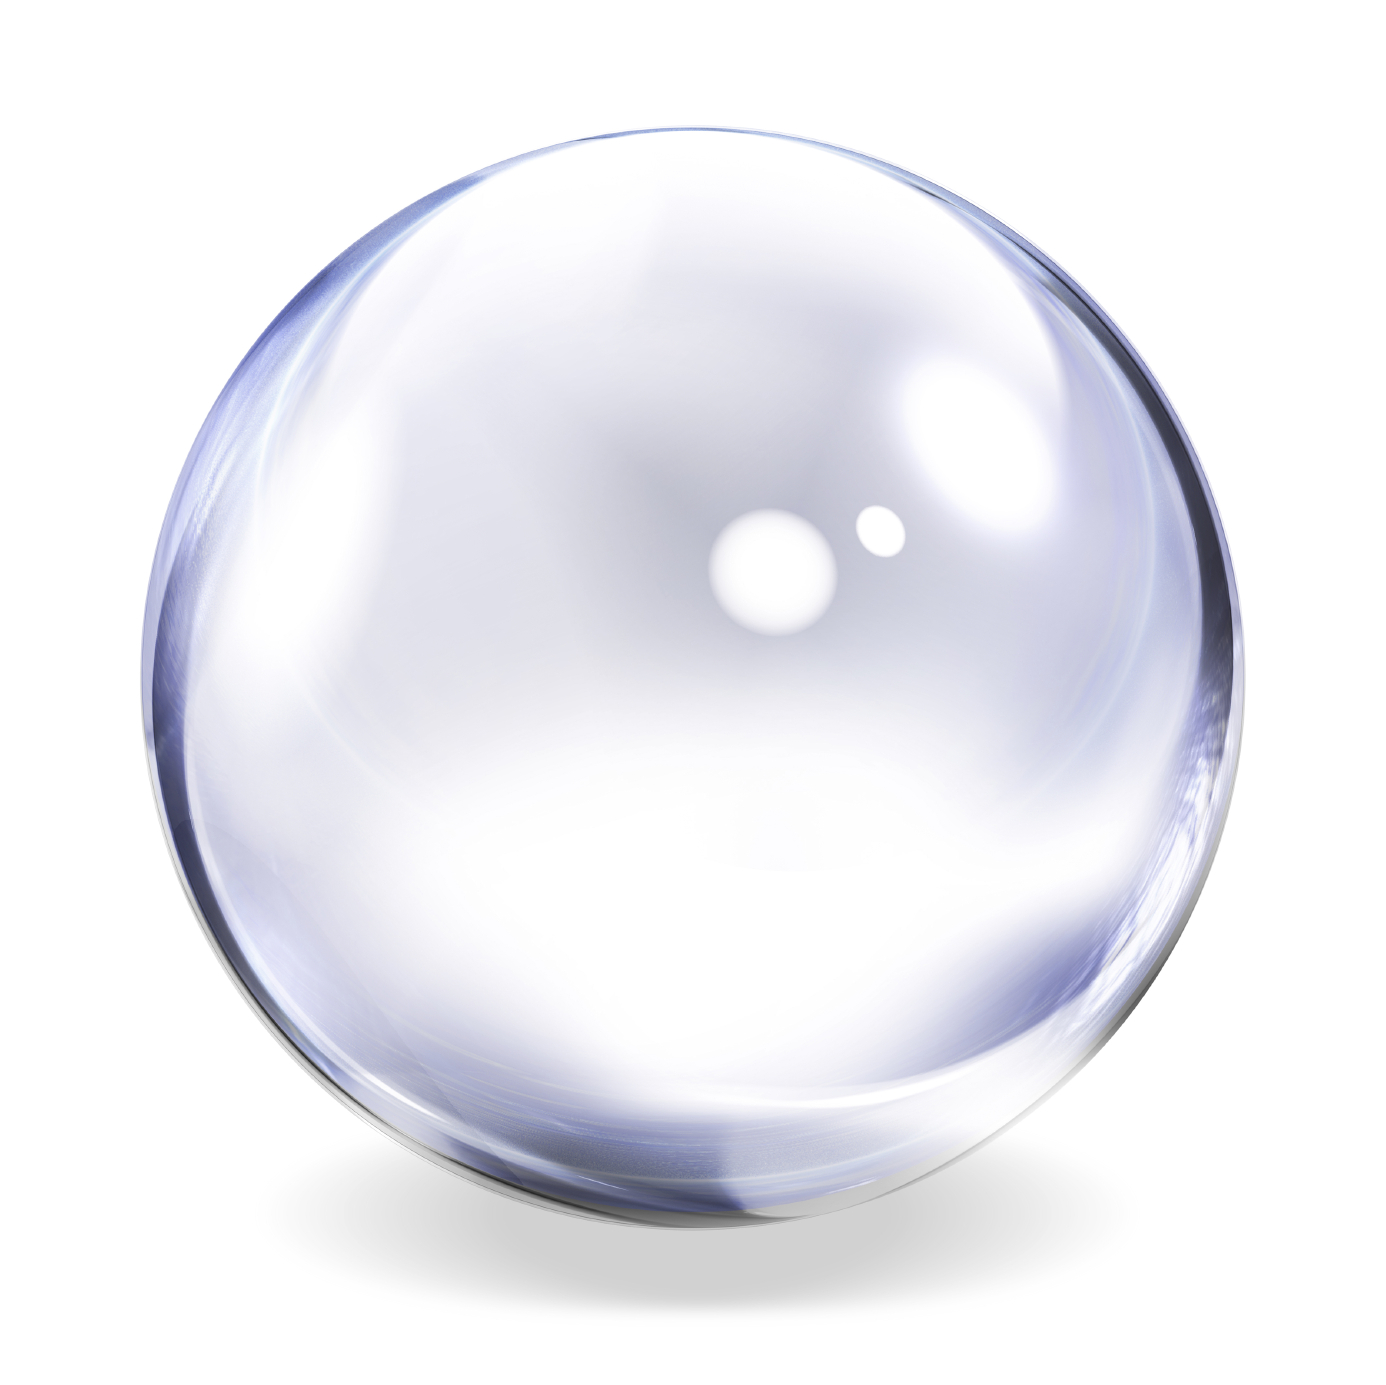 Bubble White Background High Quality Image - Bubble, Transparent background PNG HD thumbnail